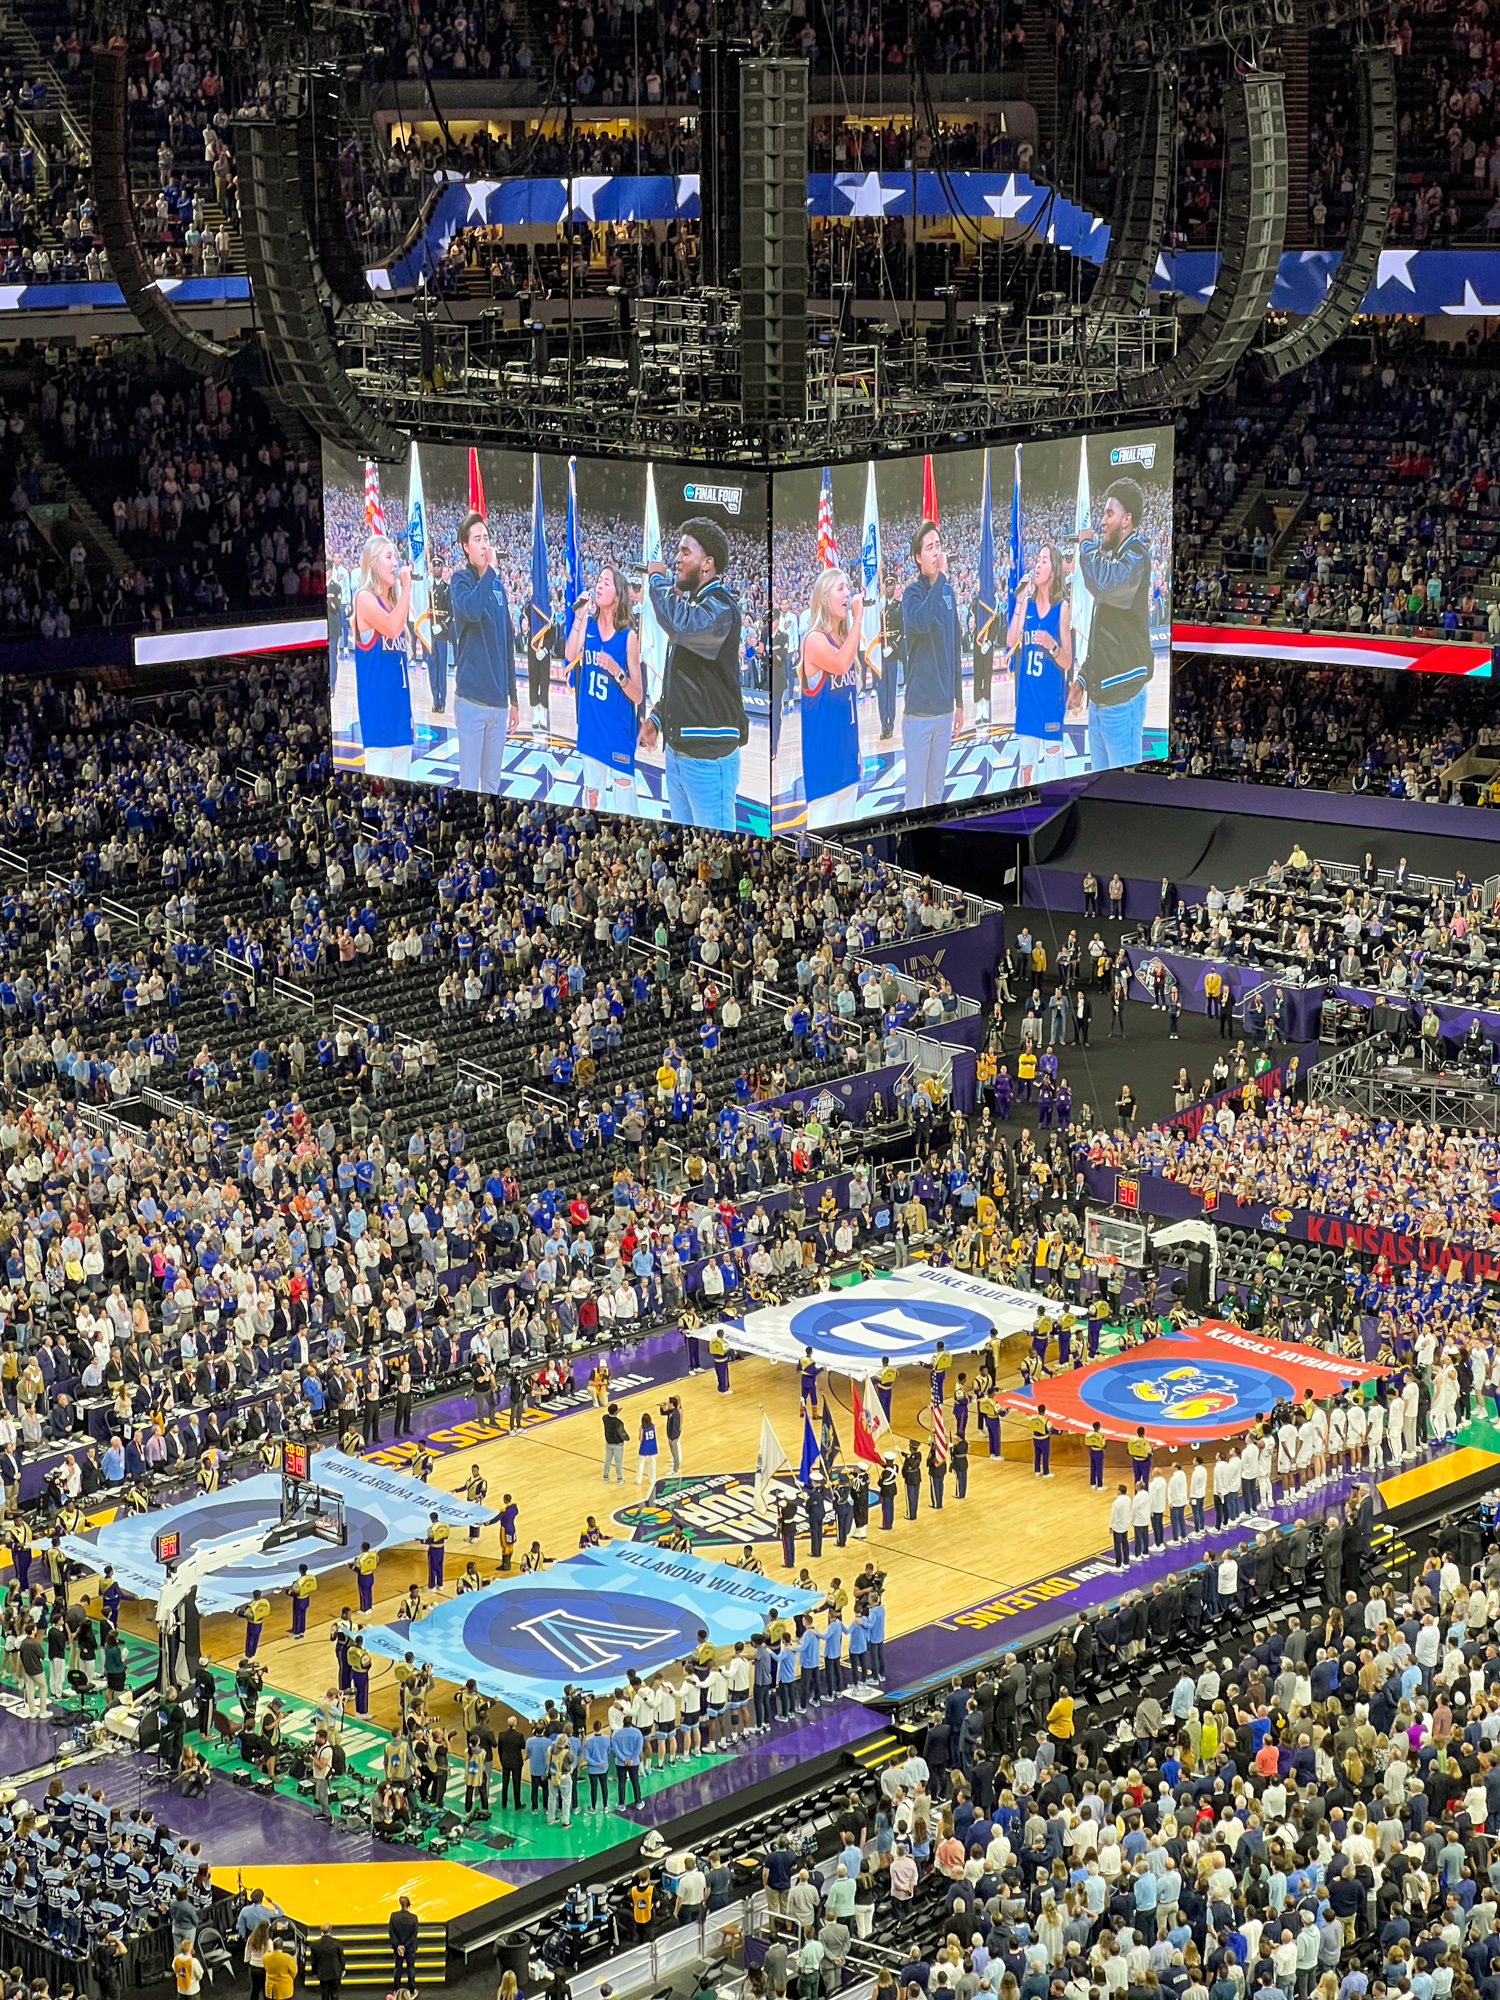 The NCAA Final Four opening ceremony at the New Orleans Superdome